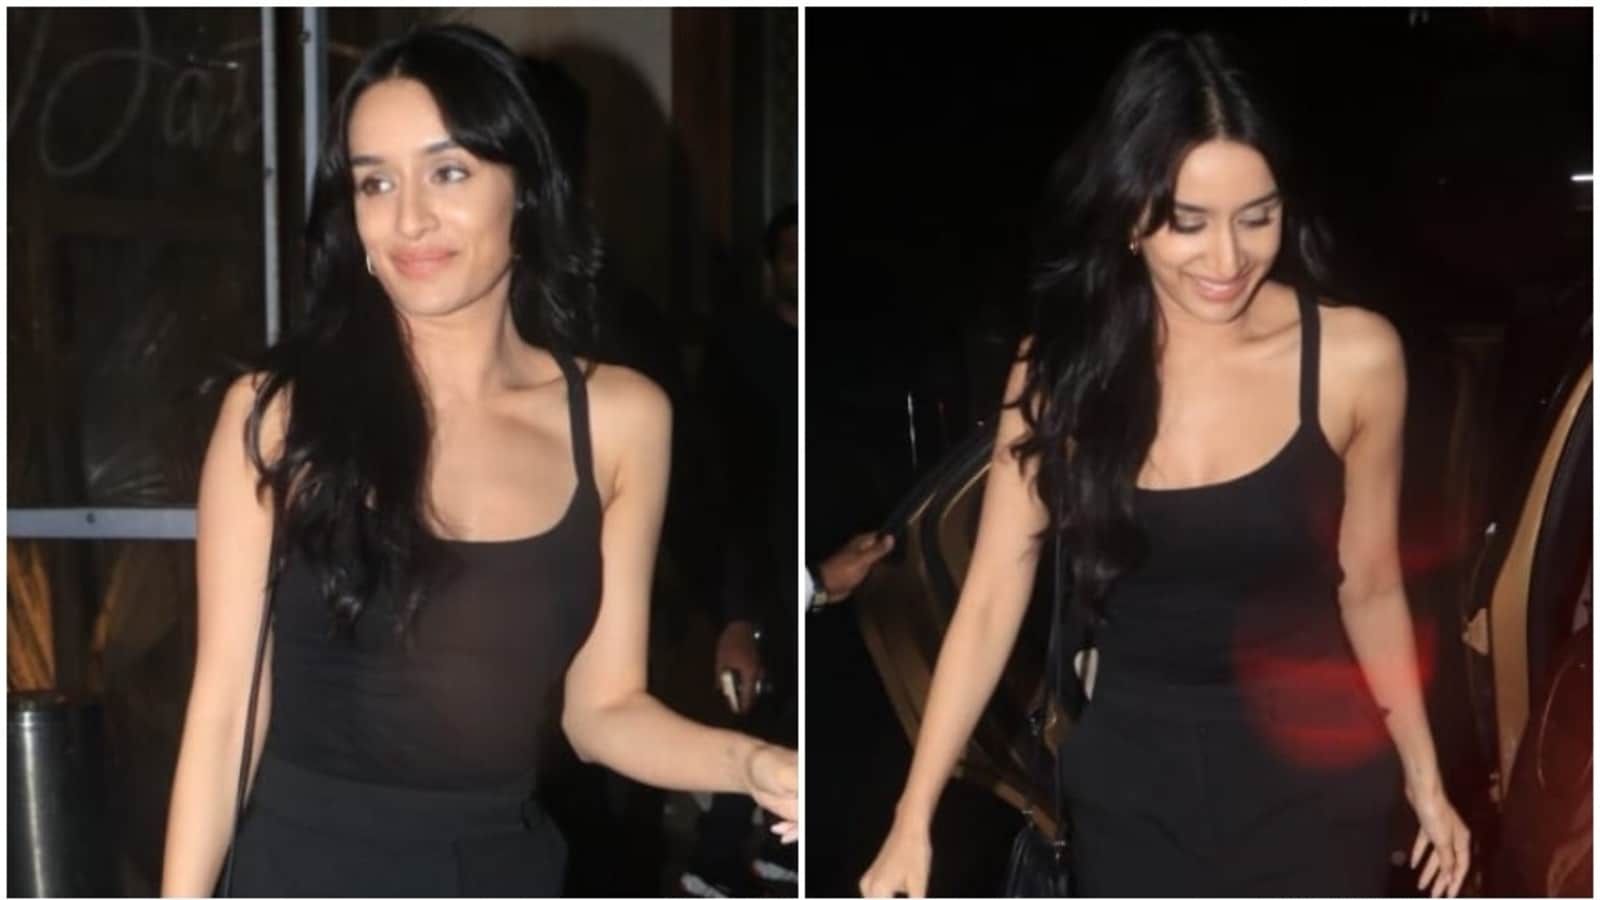 X Shraddha Kapoor - Shraddha Kapoor in black tank top and satin pants pulls off effortless  girl-next-door look: See pics and video | Fashion Trends - Hindustan Times